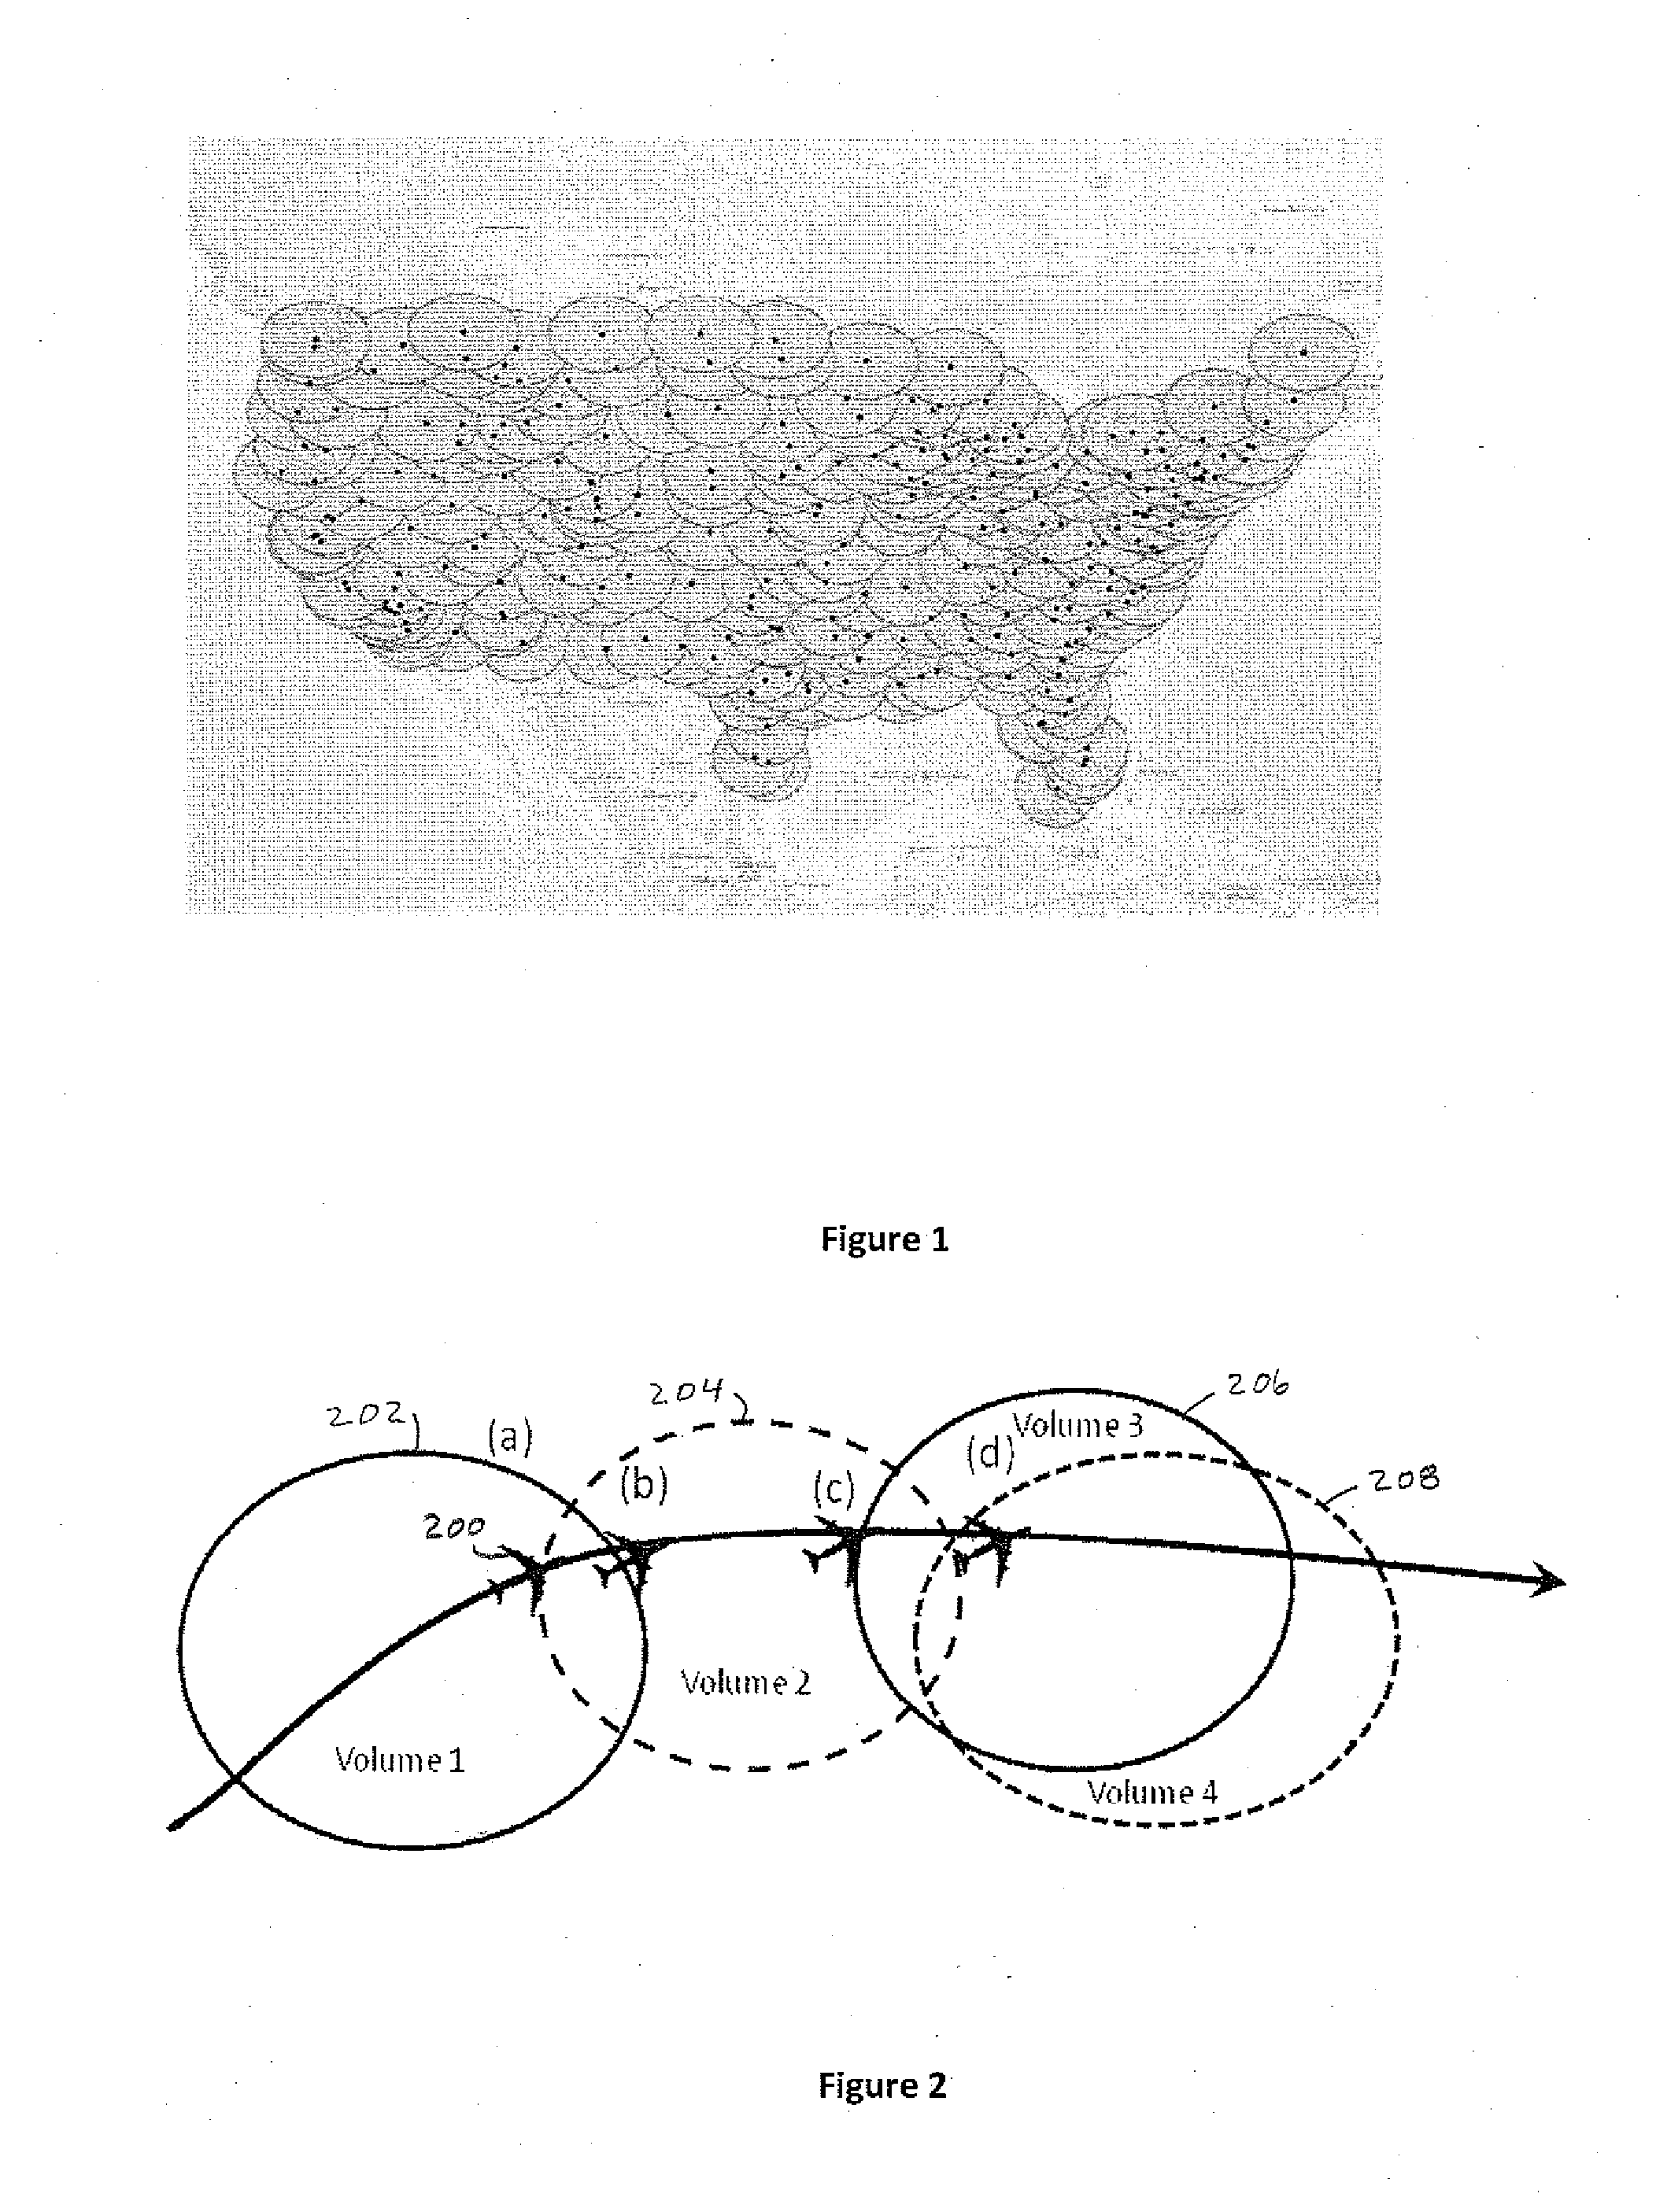 System and Method for Load Balancing and Handoff Management Based on Flight Plan and Channel Occupancy